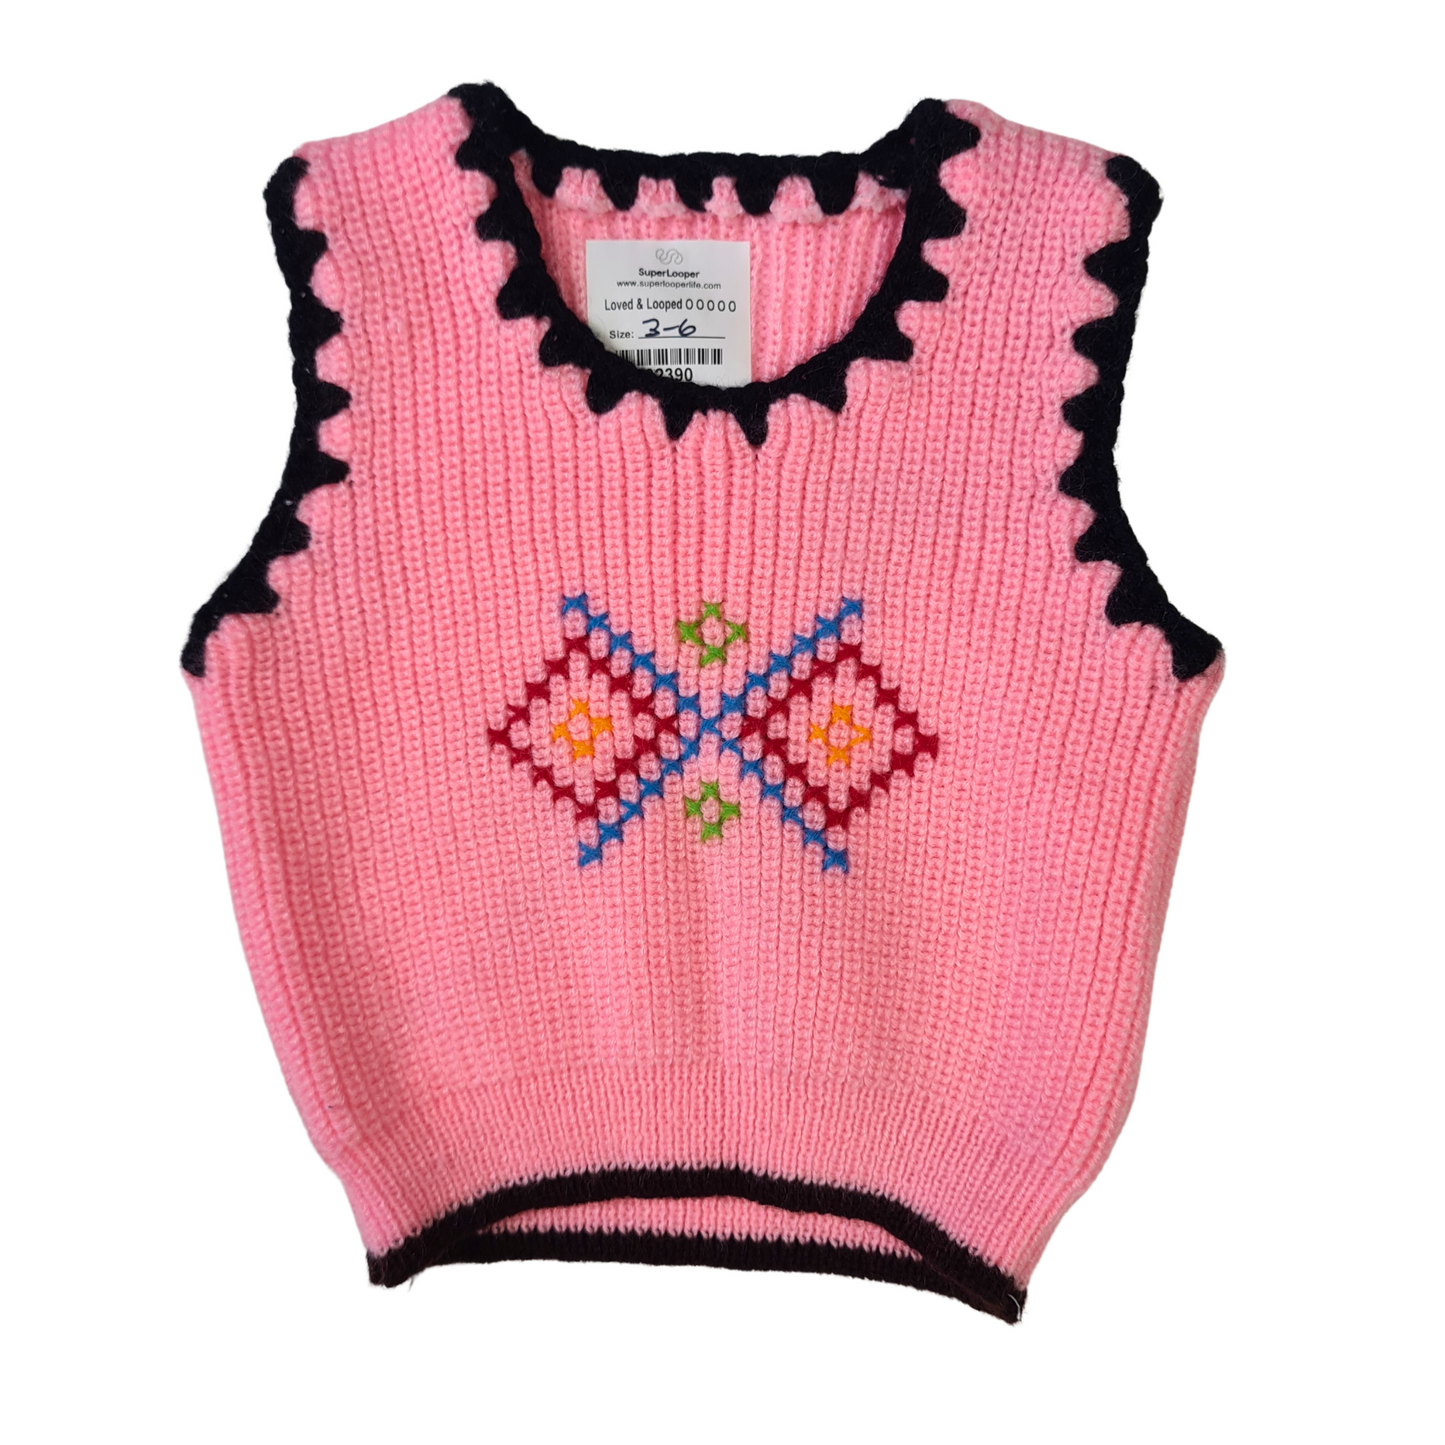 Knit Vest with embroidered design.